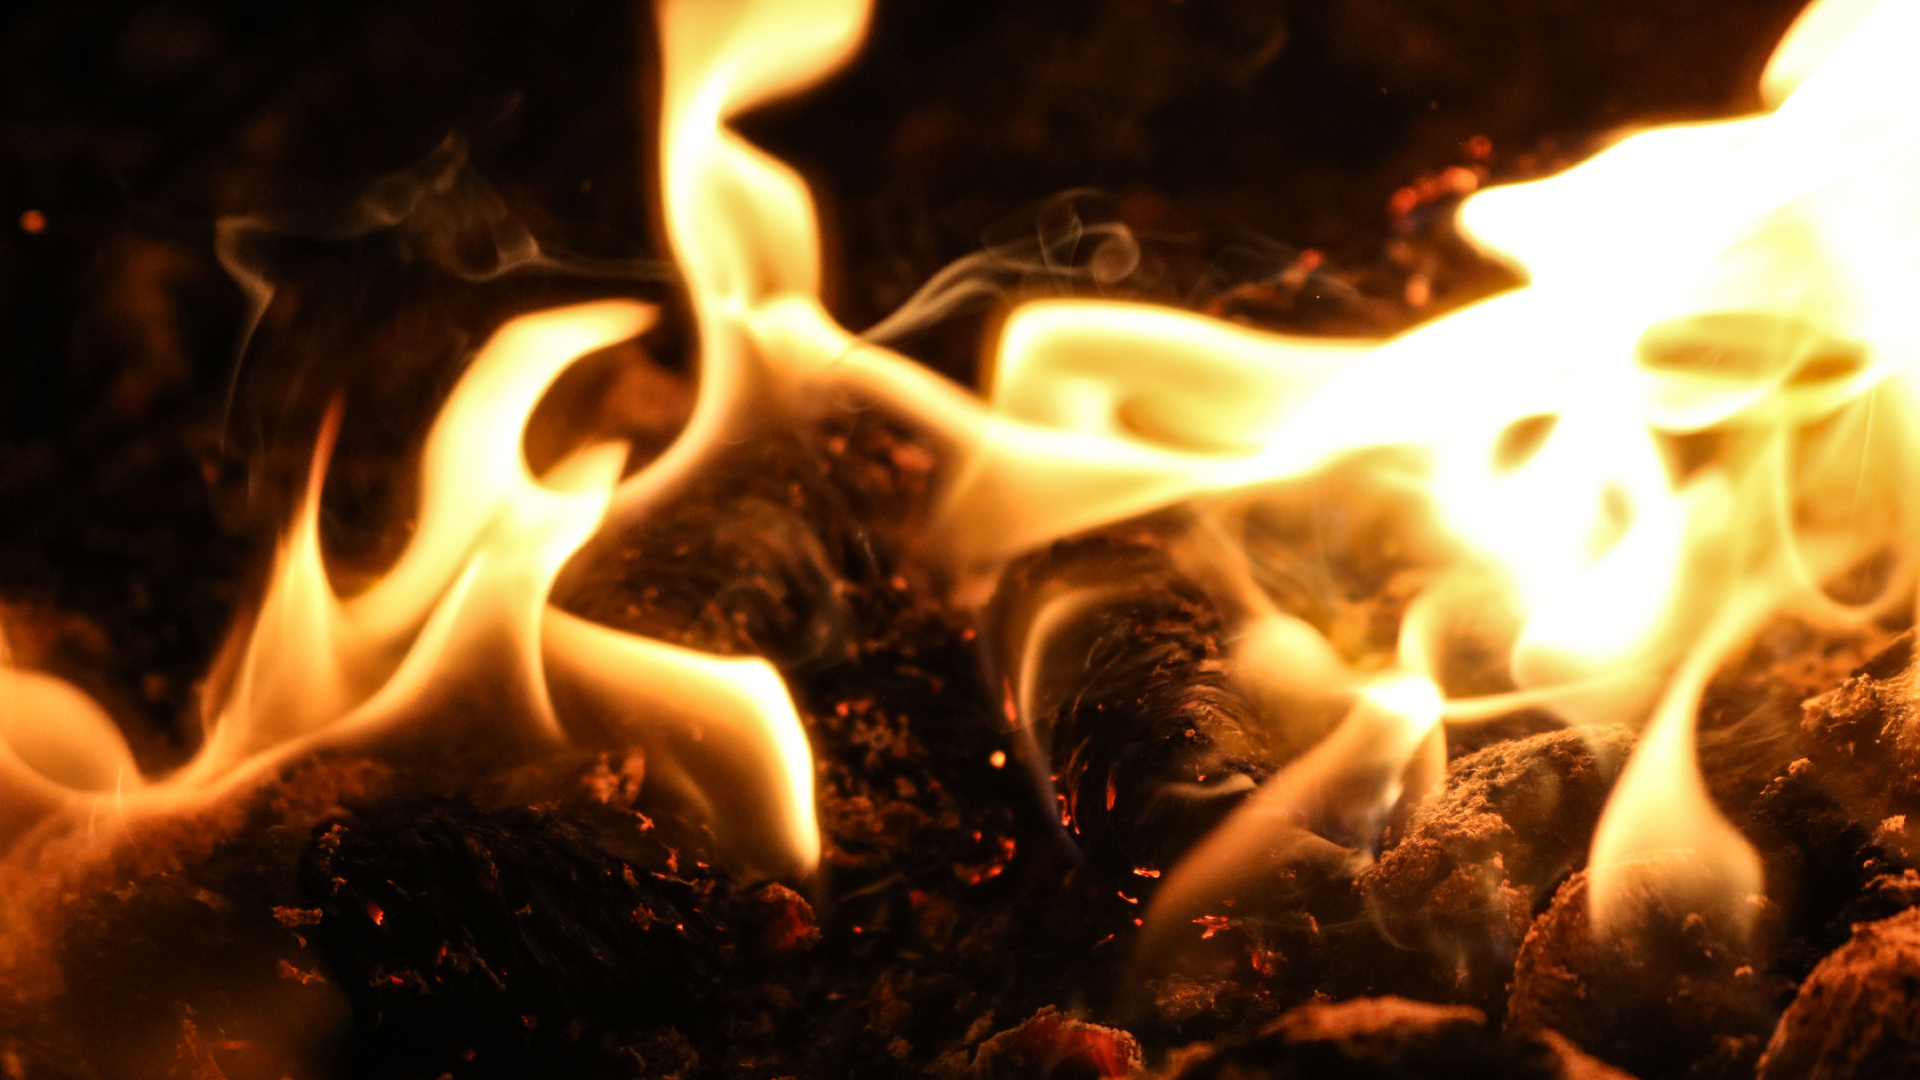 Fire in The Dark During Night Time. Wallpaper in 1920x1080 Resolution